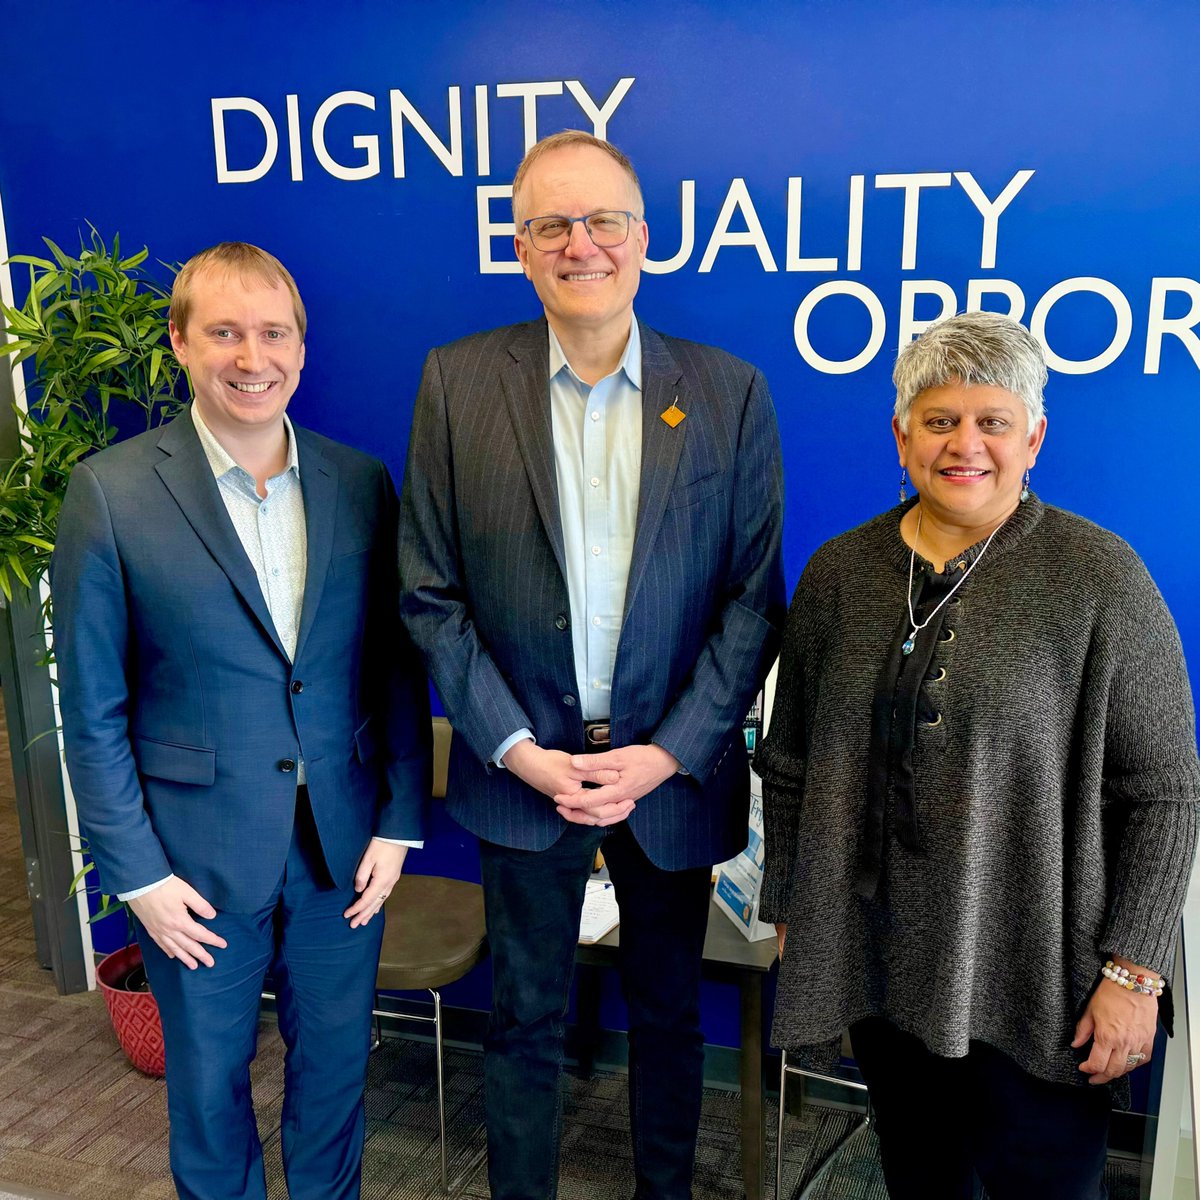 Yesterday our CEO, Alison Dantas, and Exec Director Fund Development, Kyle Tiney, had the honour of hosting New Westminster-Burnaby MP @MPJulian at our head office to share our renewed vision for the future to best support the women, girls and children at risk in our community.